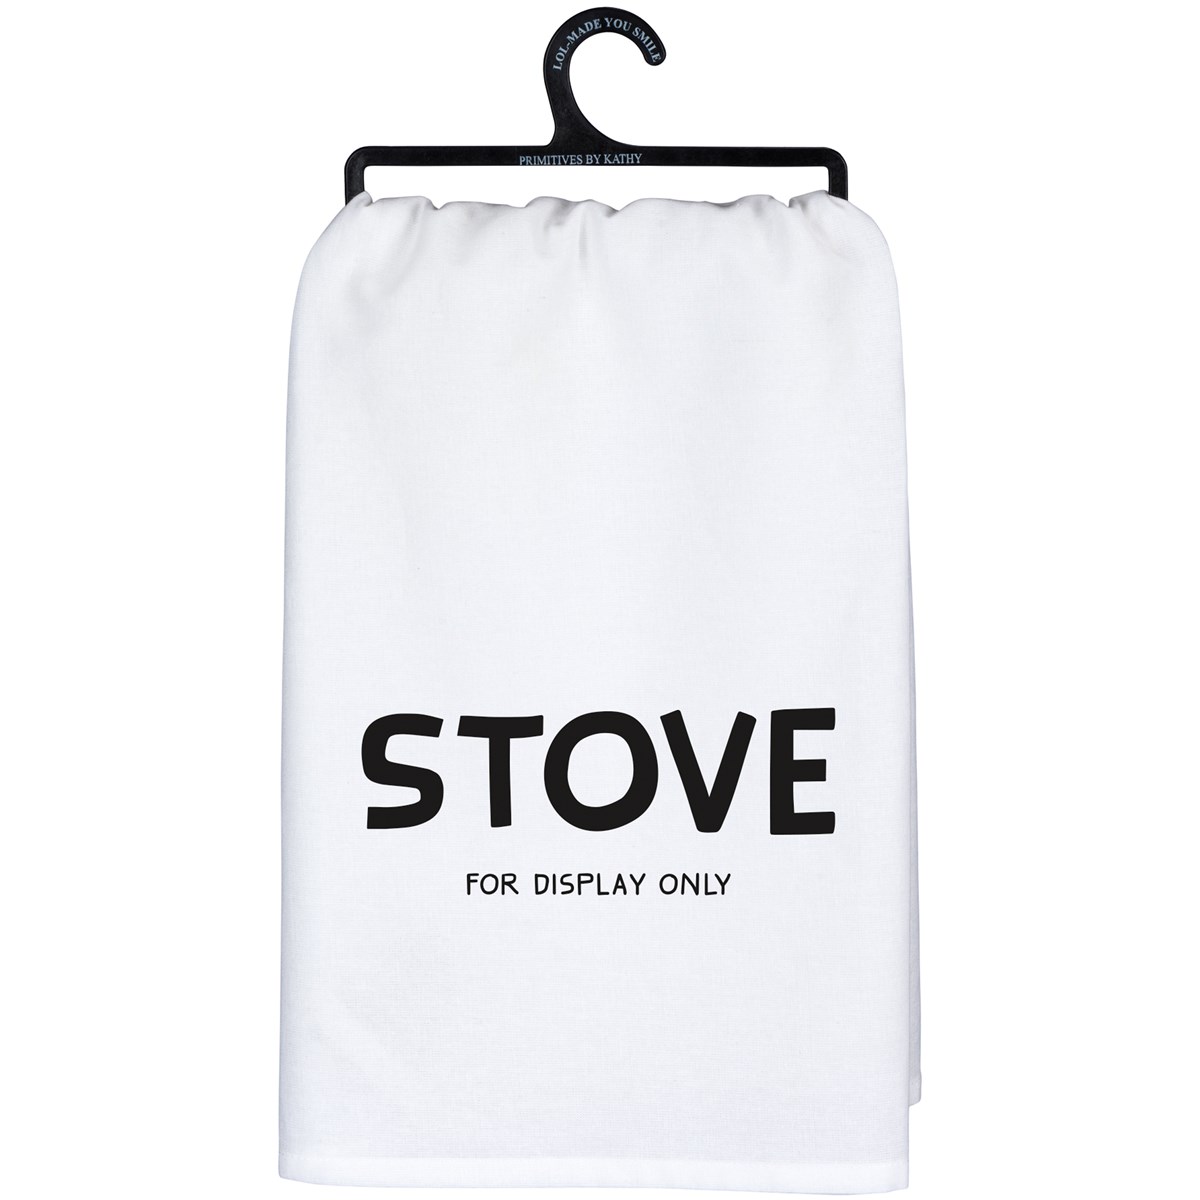 Display Only Kitchen Towel - Cotton